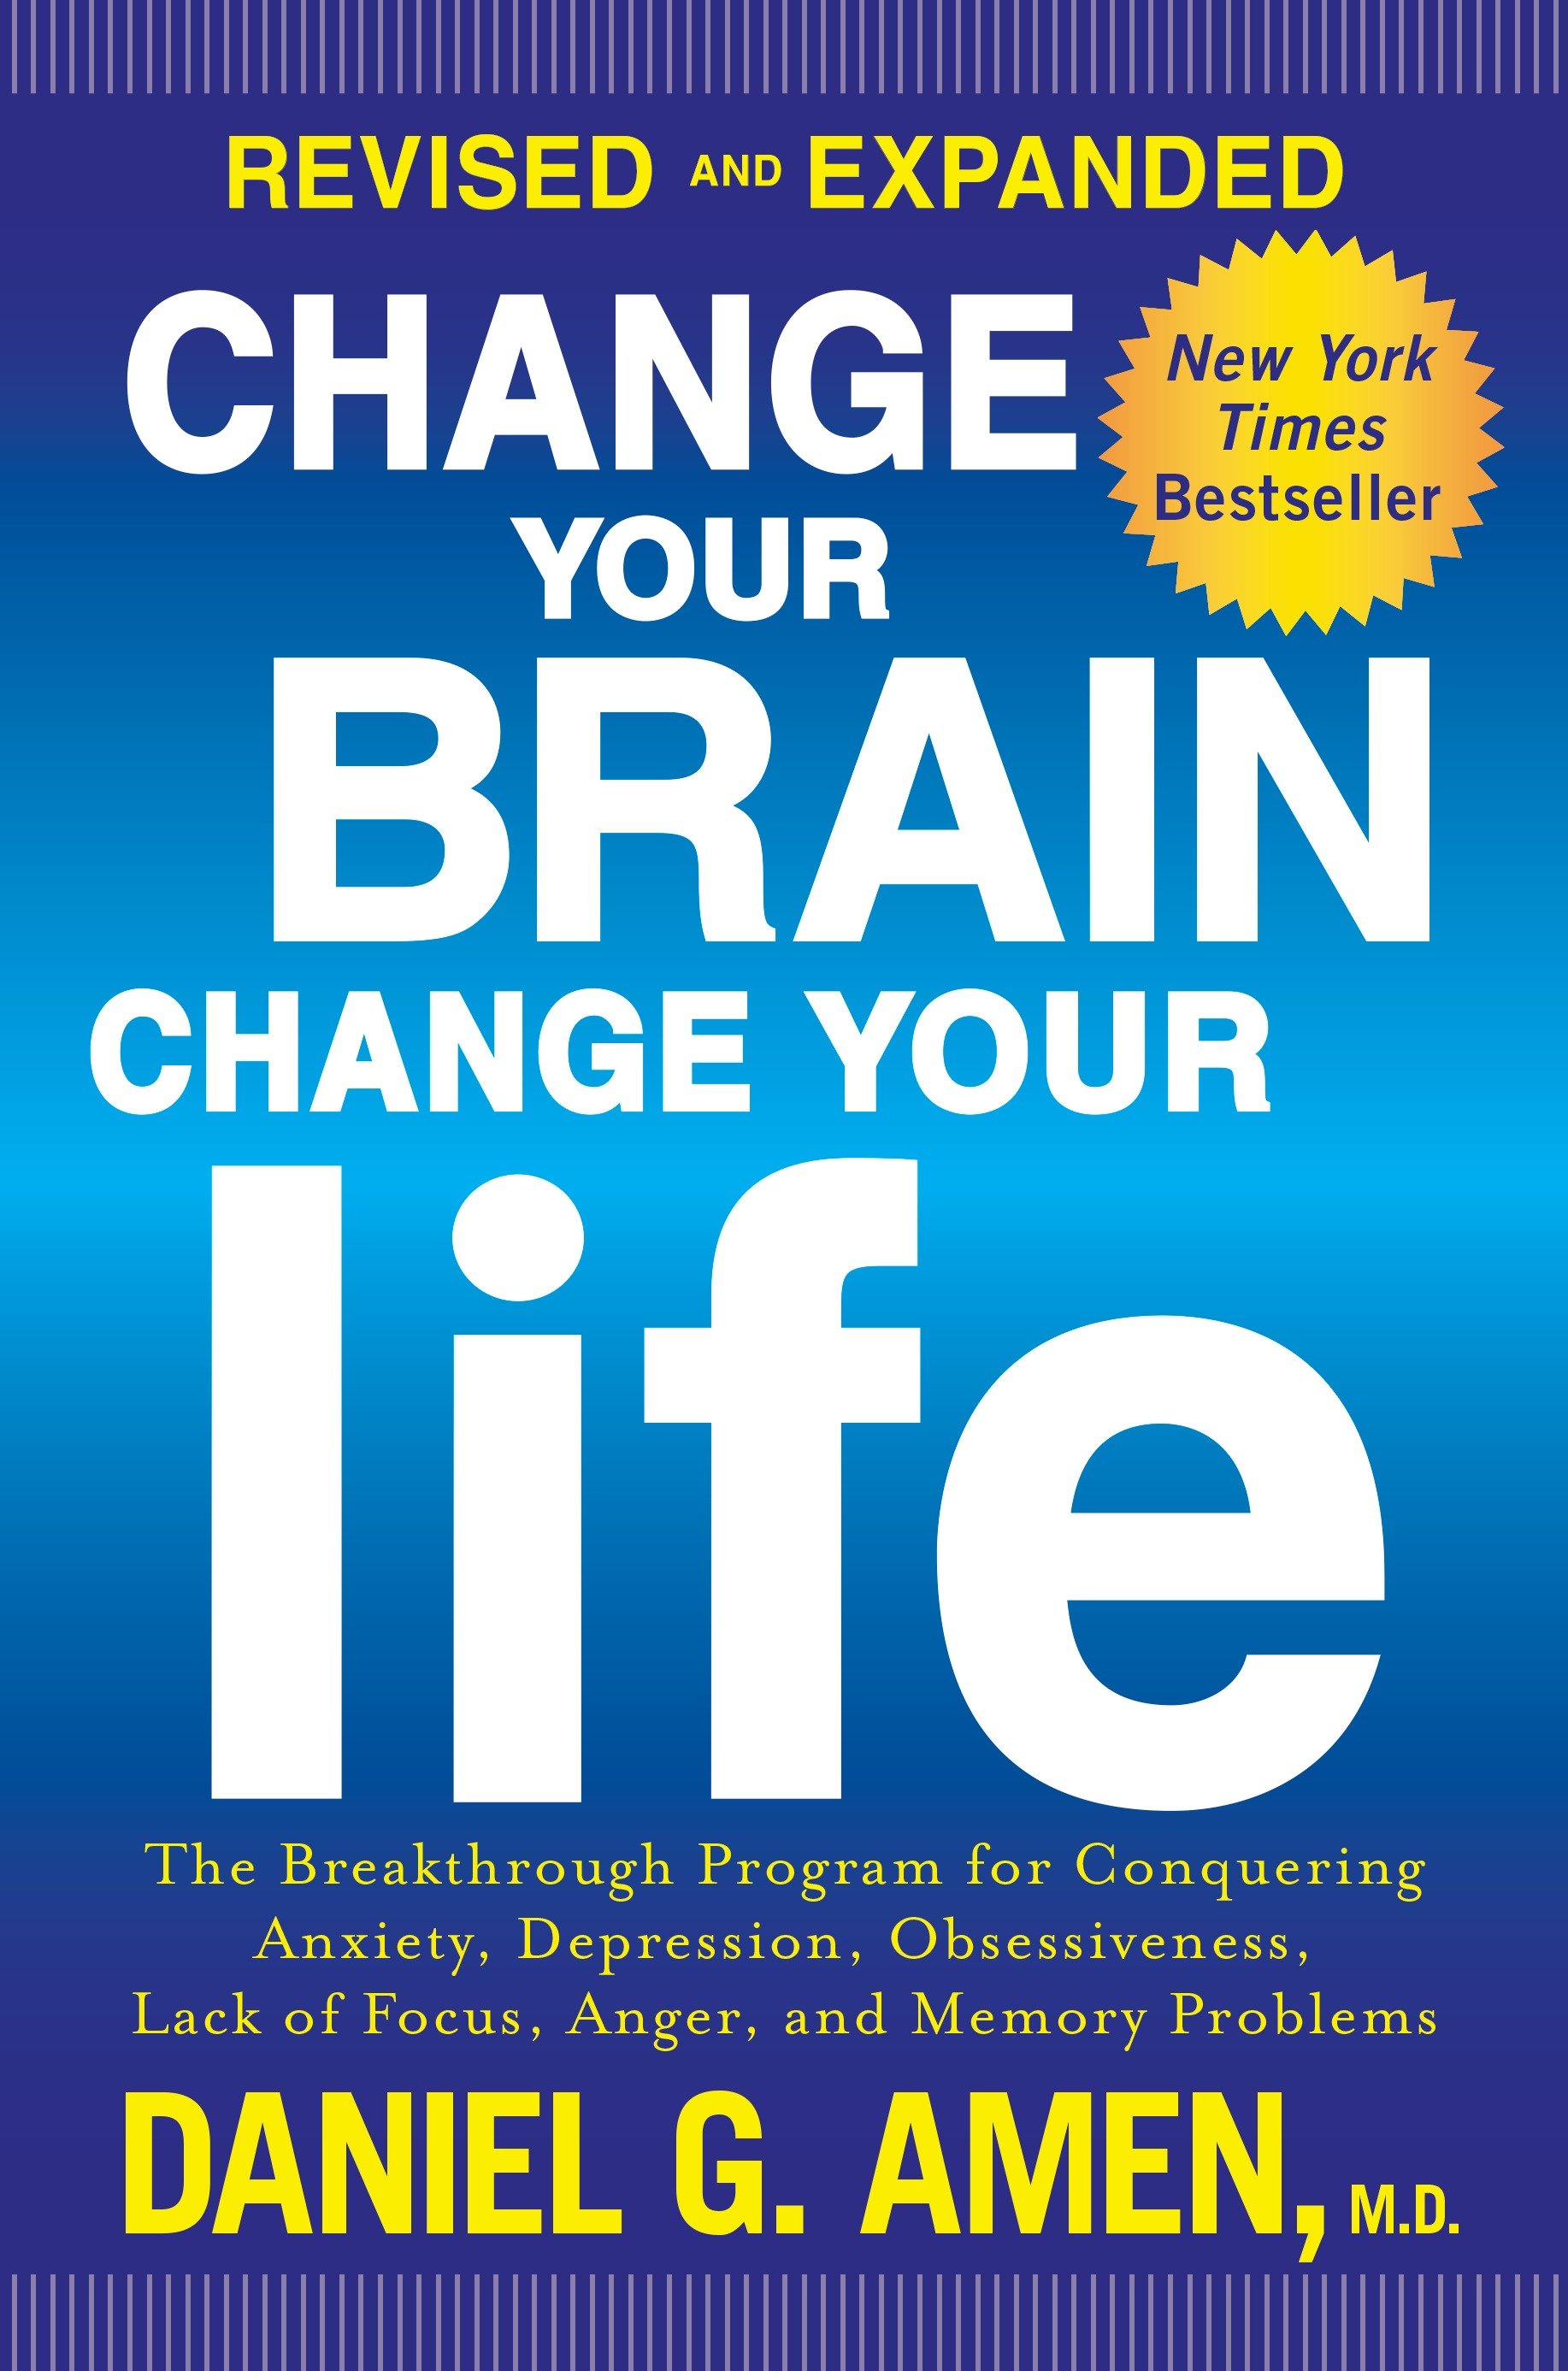 Change your brain, change your life the breakthrough program for conquering anxiety, depression, obsessiveness, lack of focus, anger, and memory problems cover image